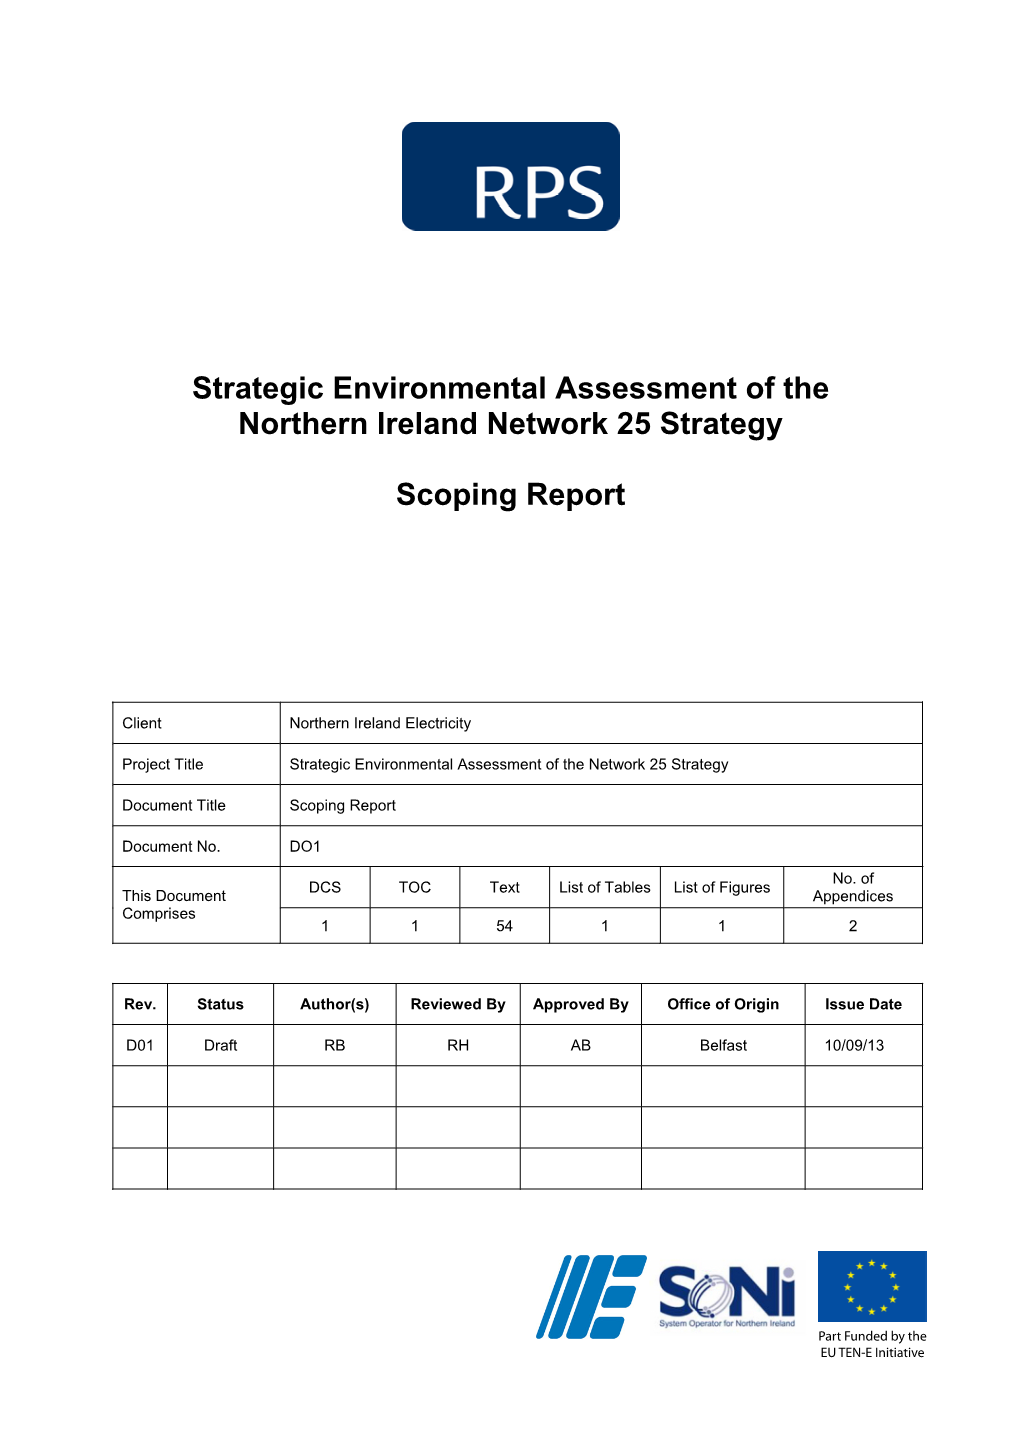 Strategic Environmental Assessment of the Northern Ireland Network 25 Strategy